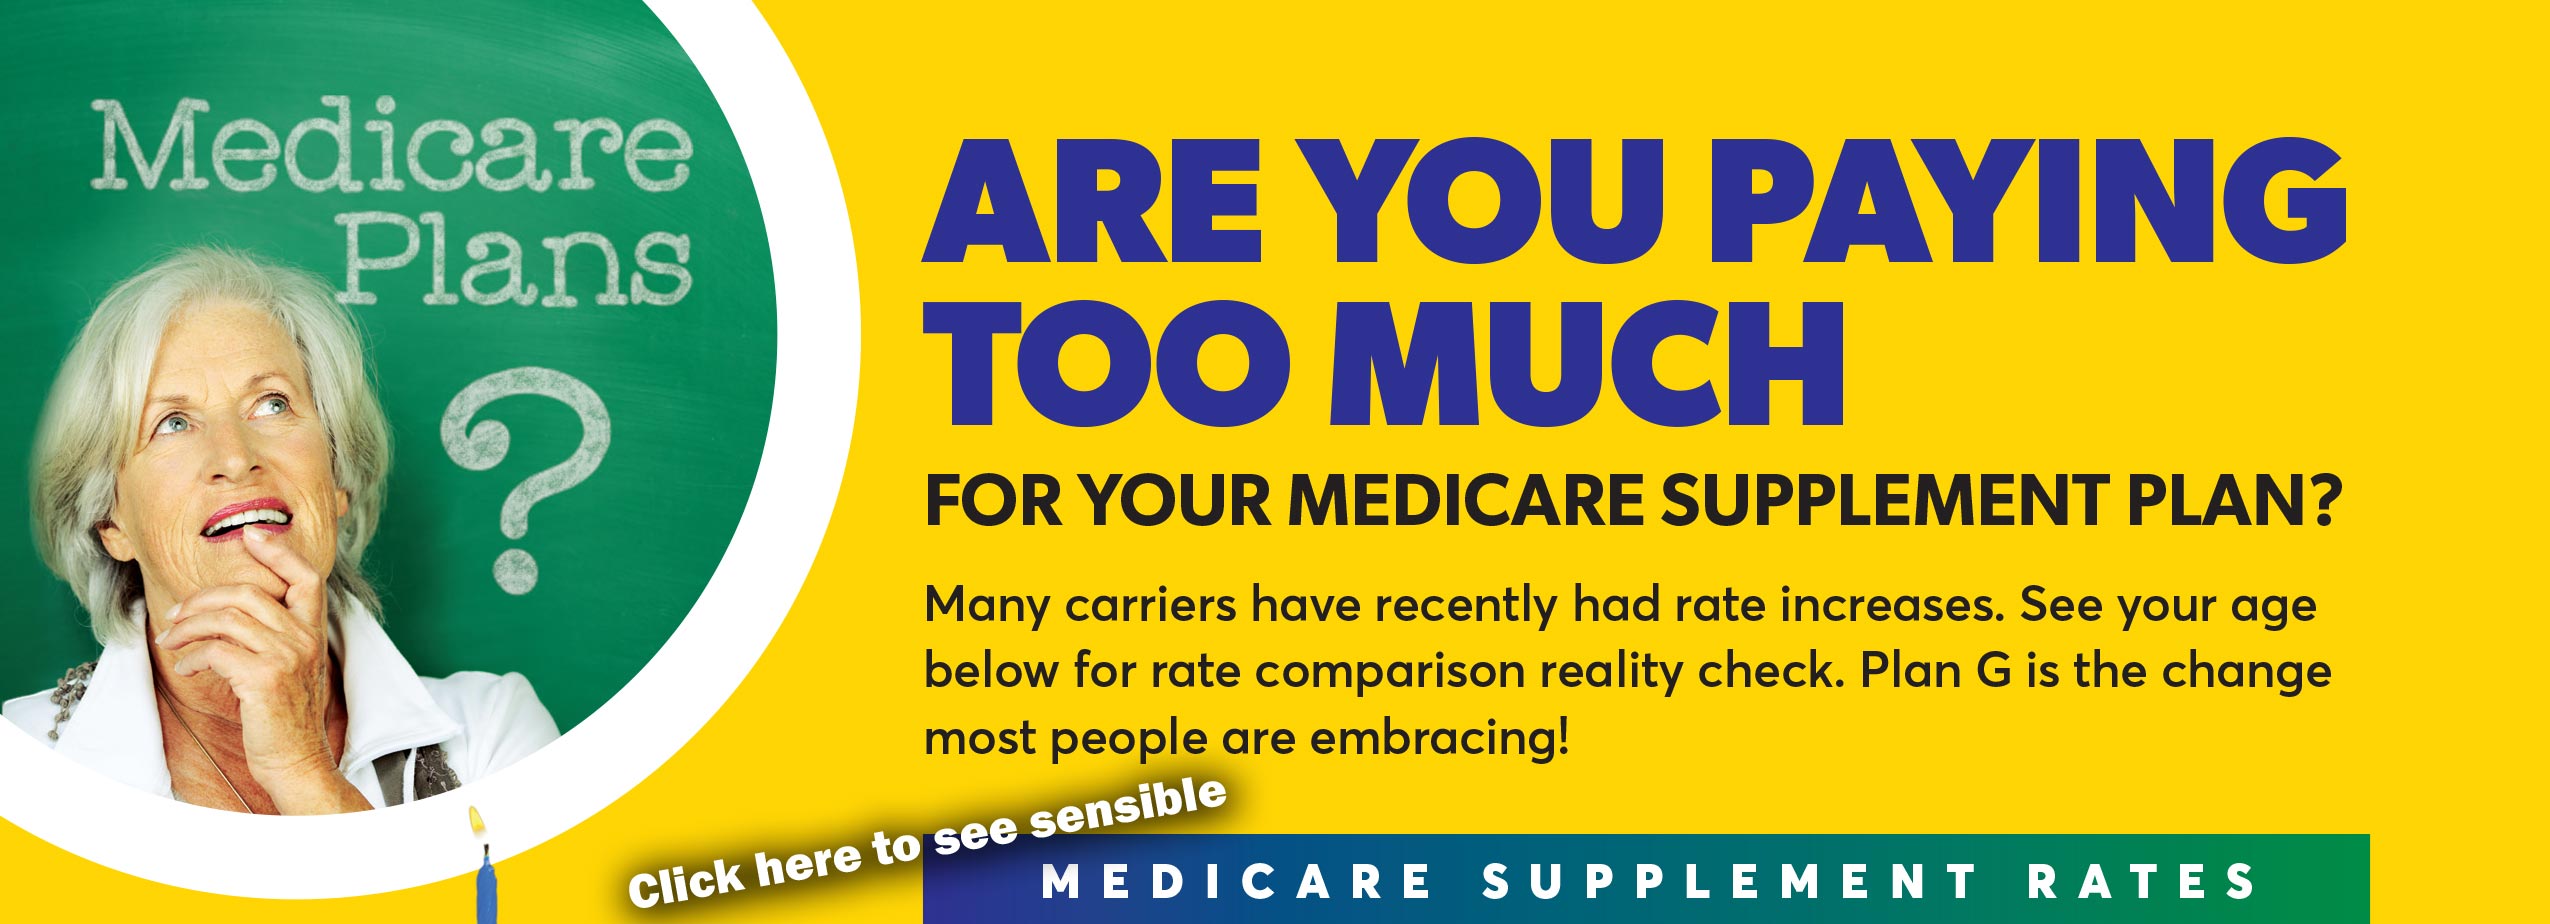 Are you paying too much for Medicare supplement plans?